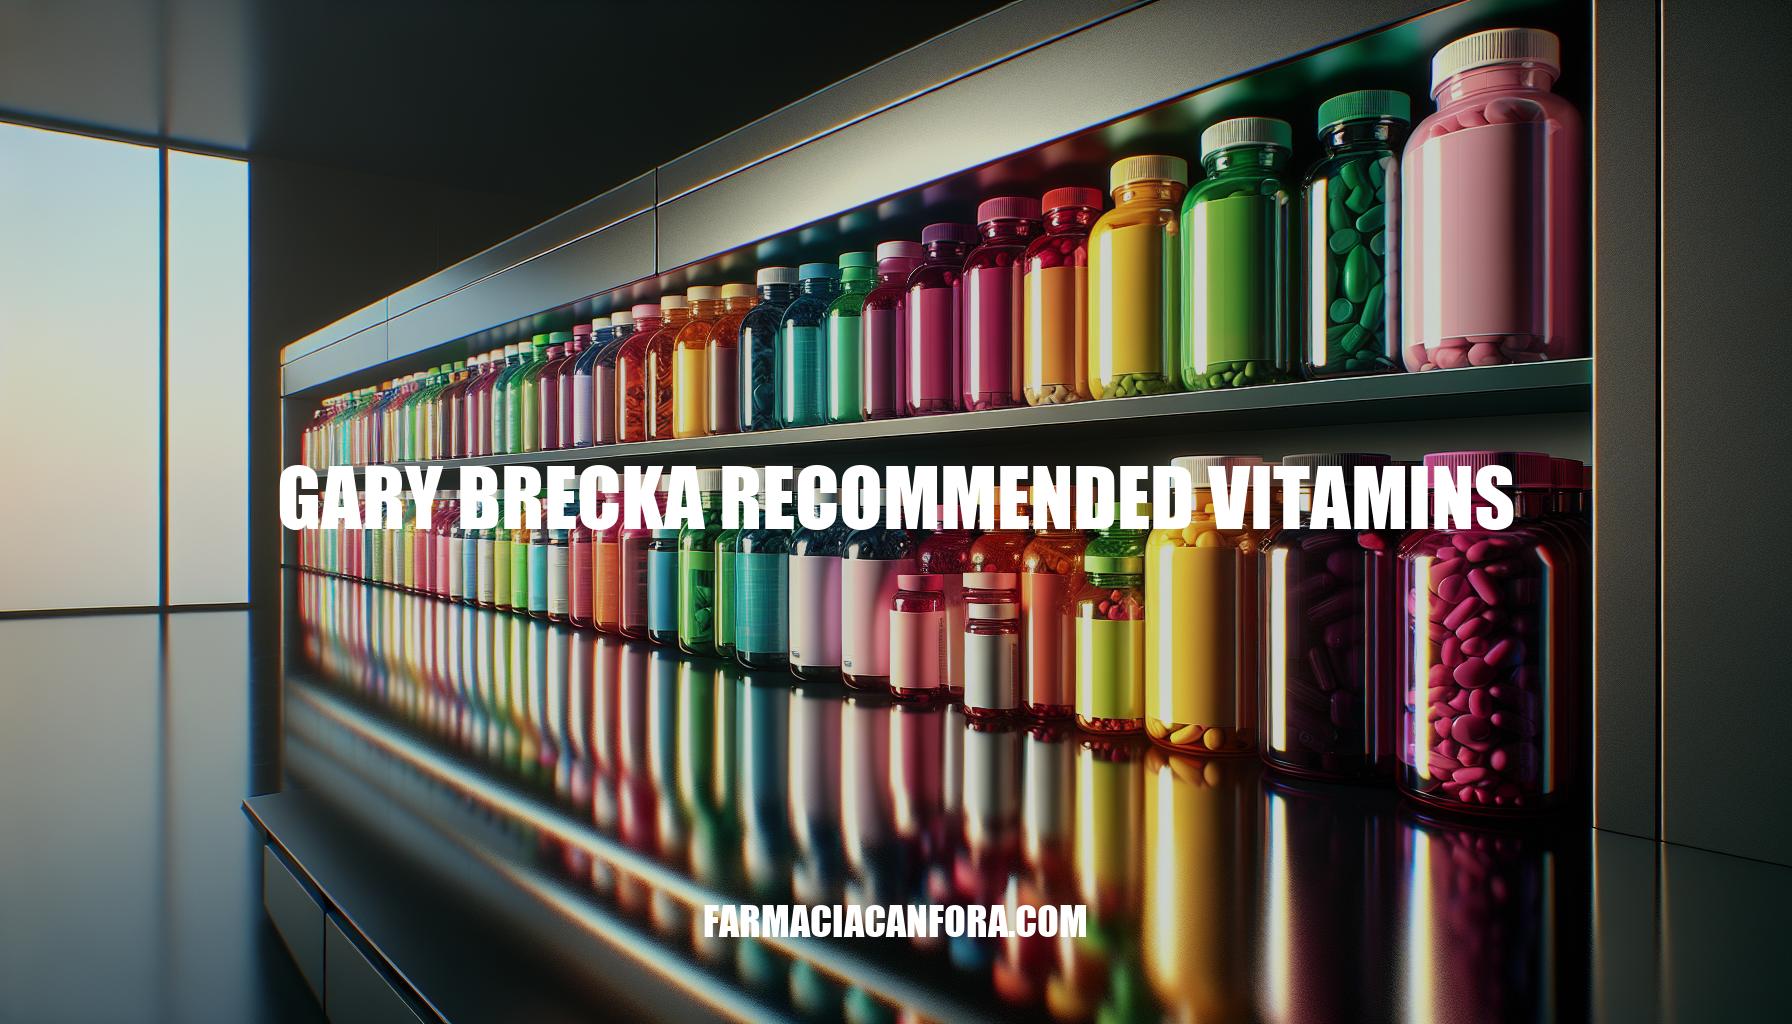 Gary Brecka Recommended Vitamins: Optimal Health Supplements for Wellness